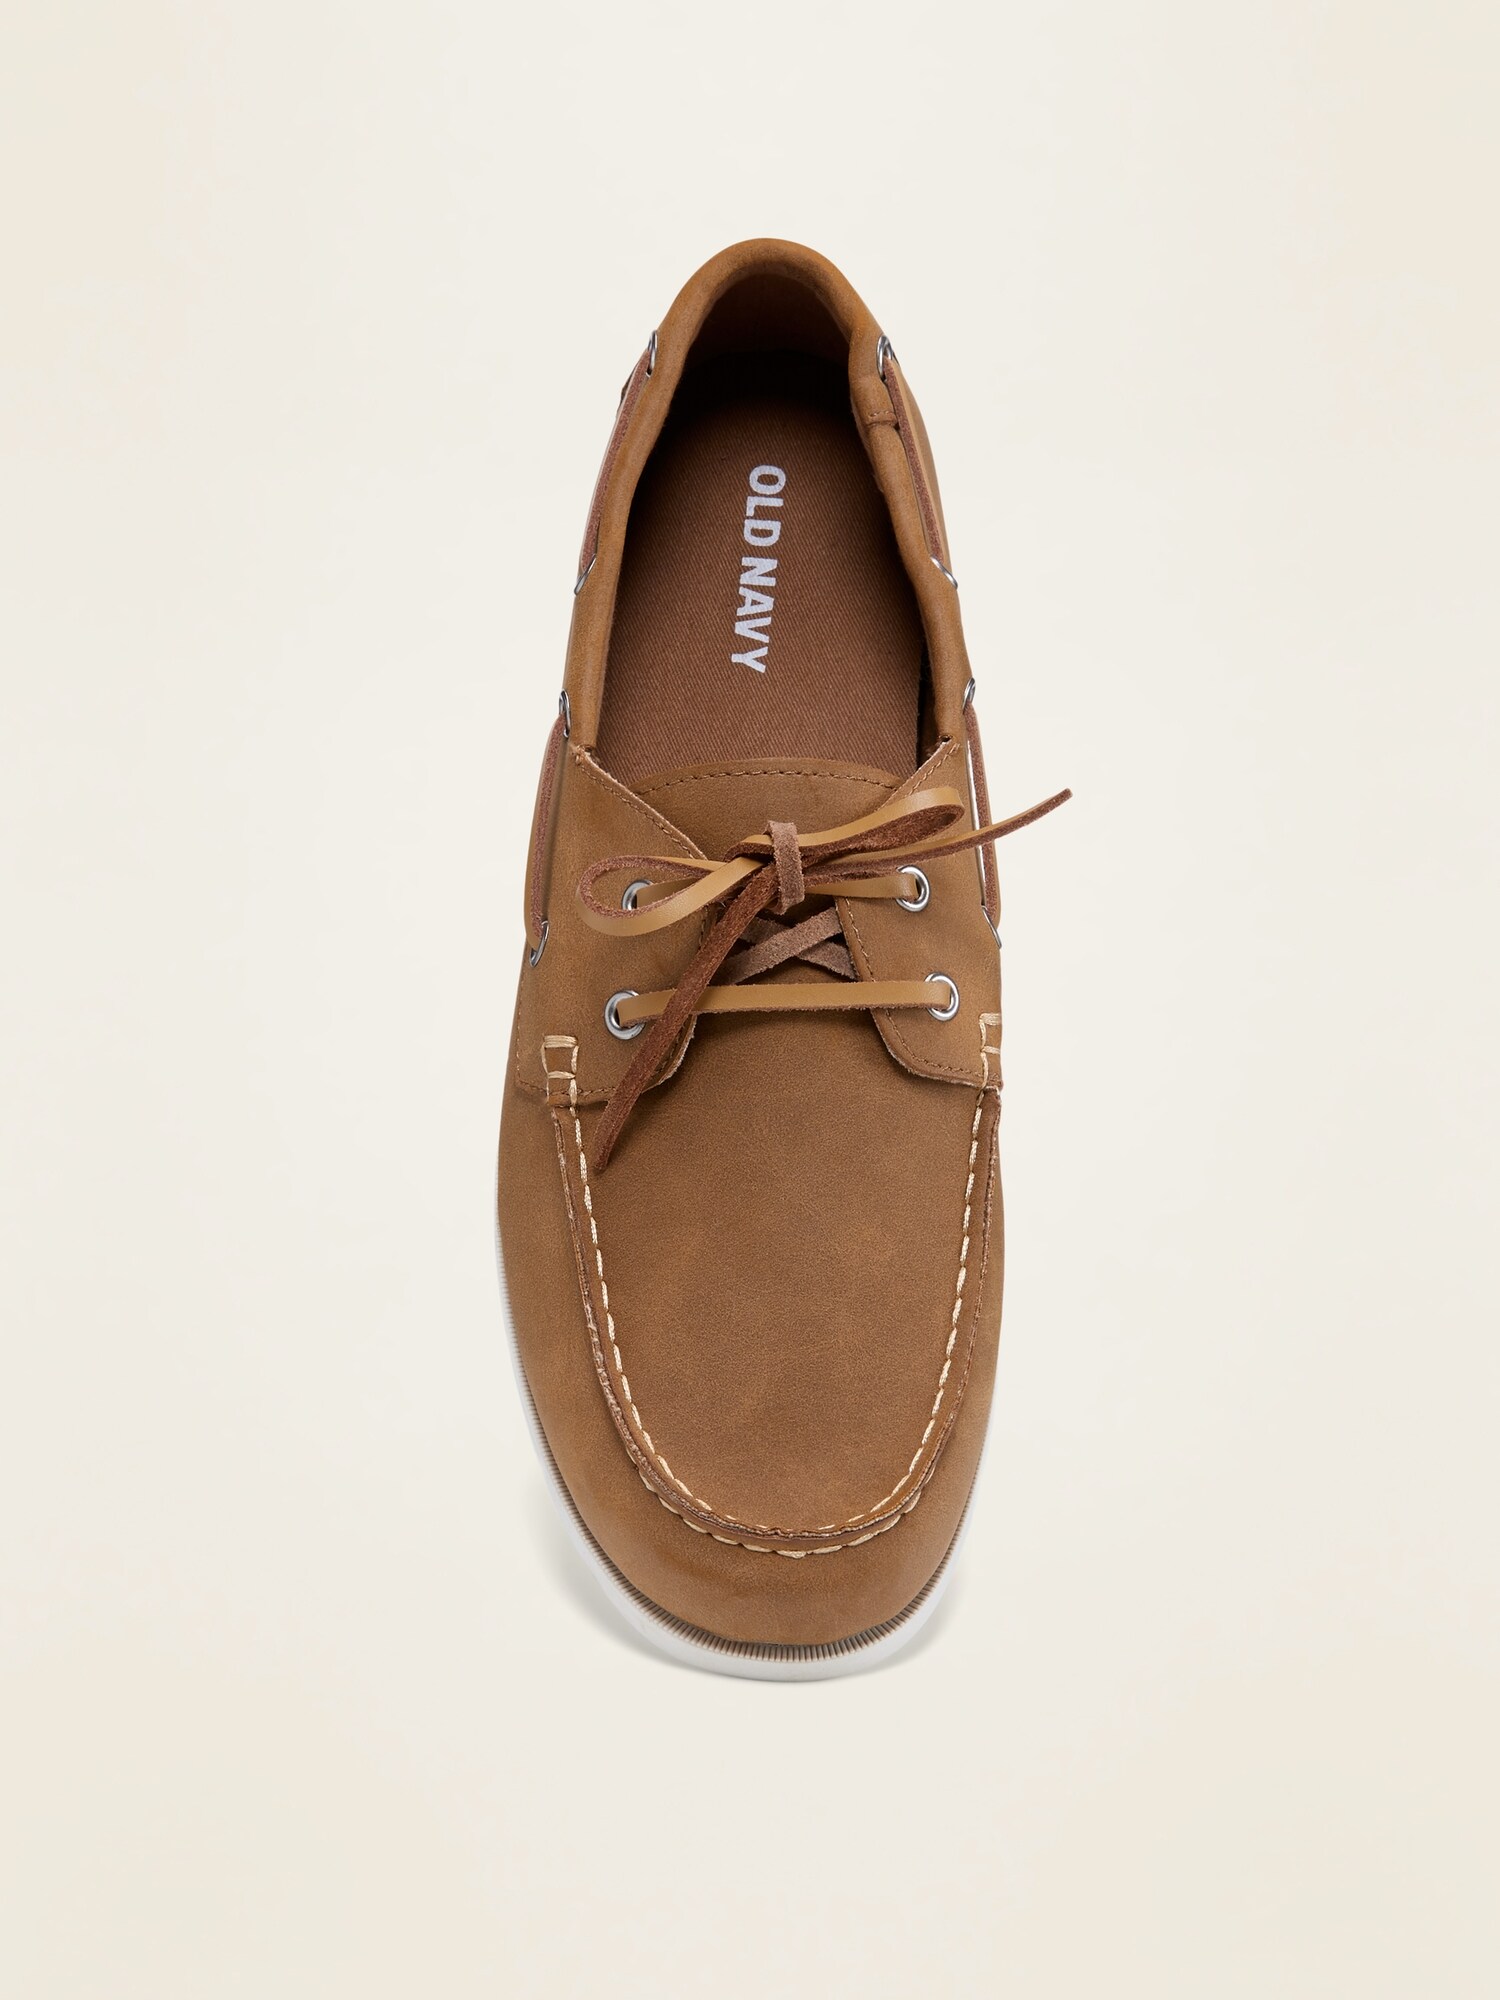 old navy leather shoes